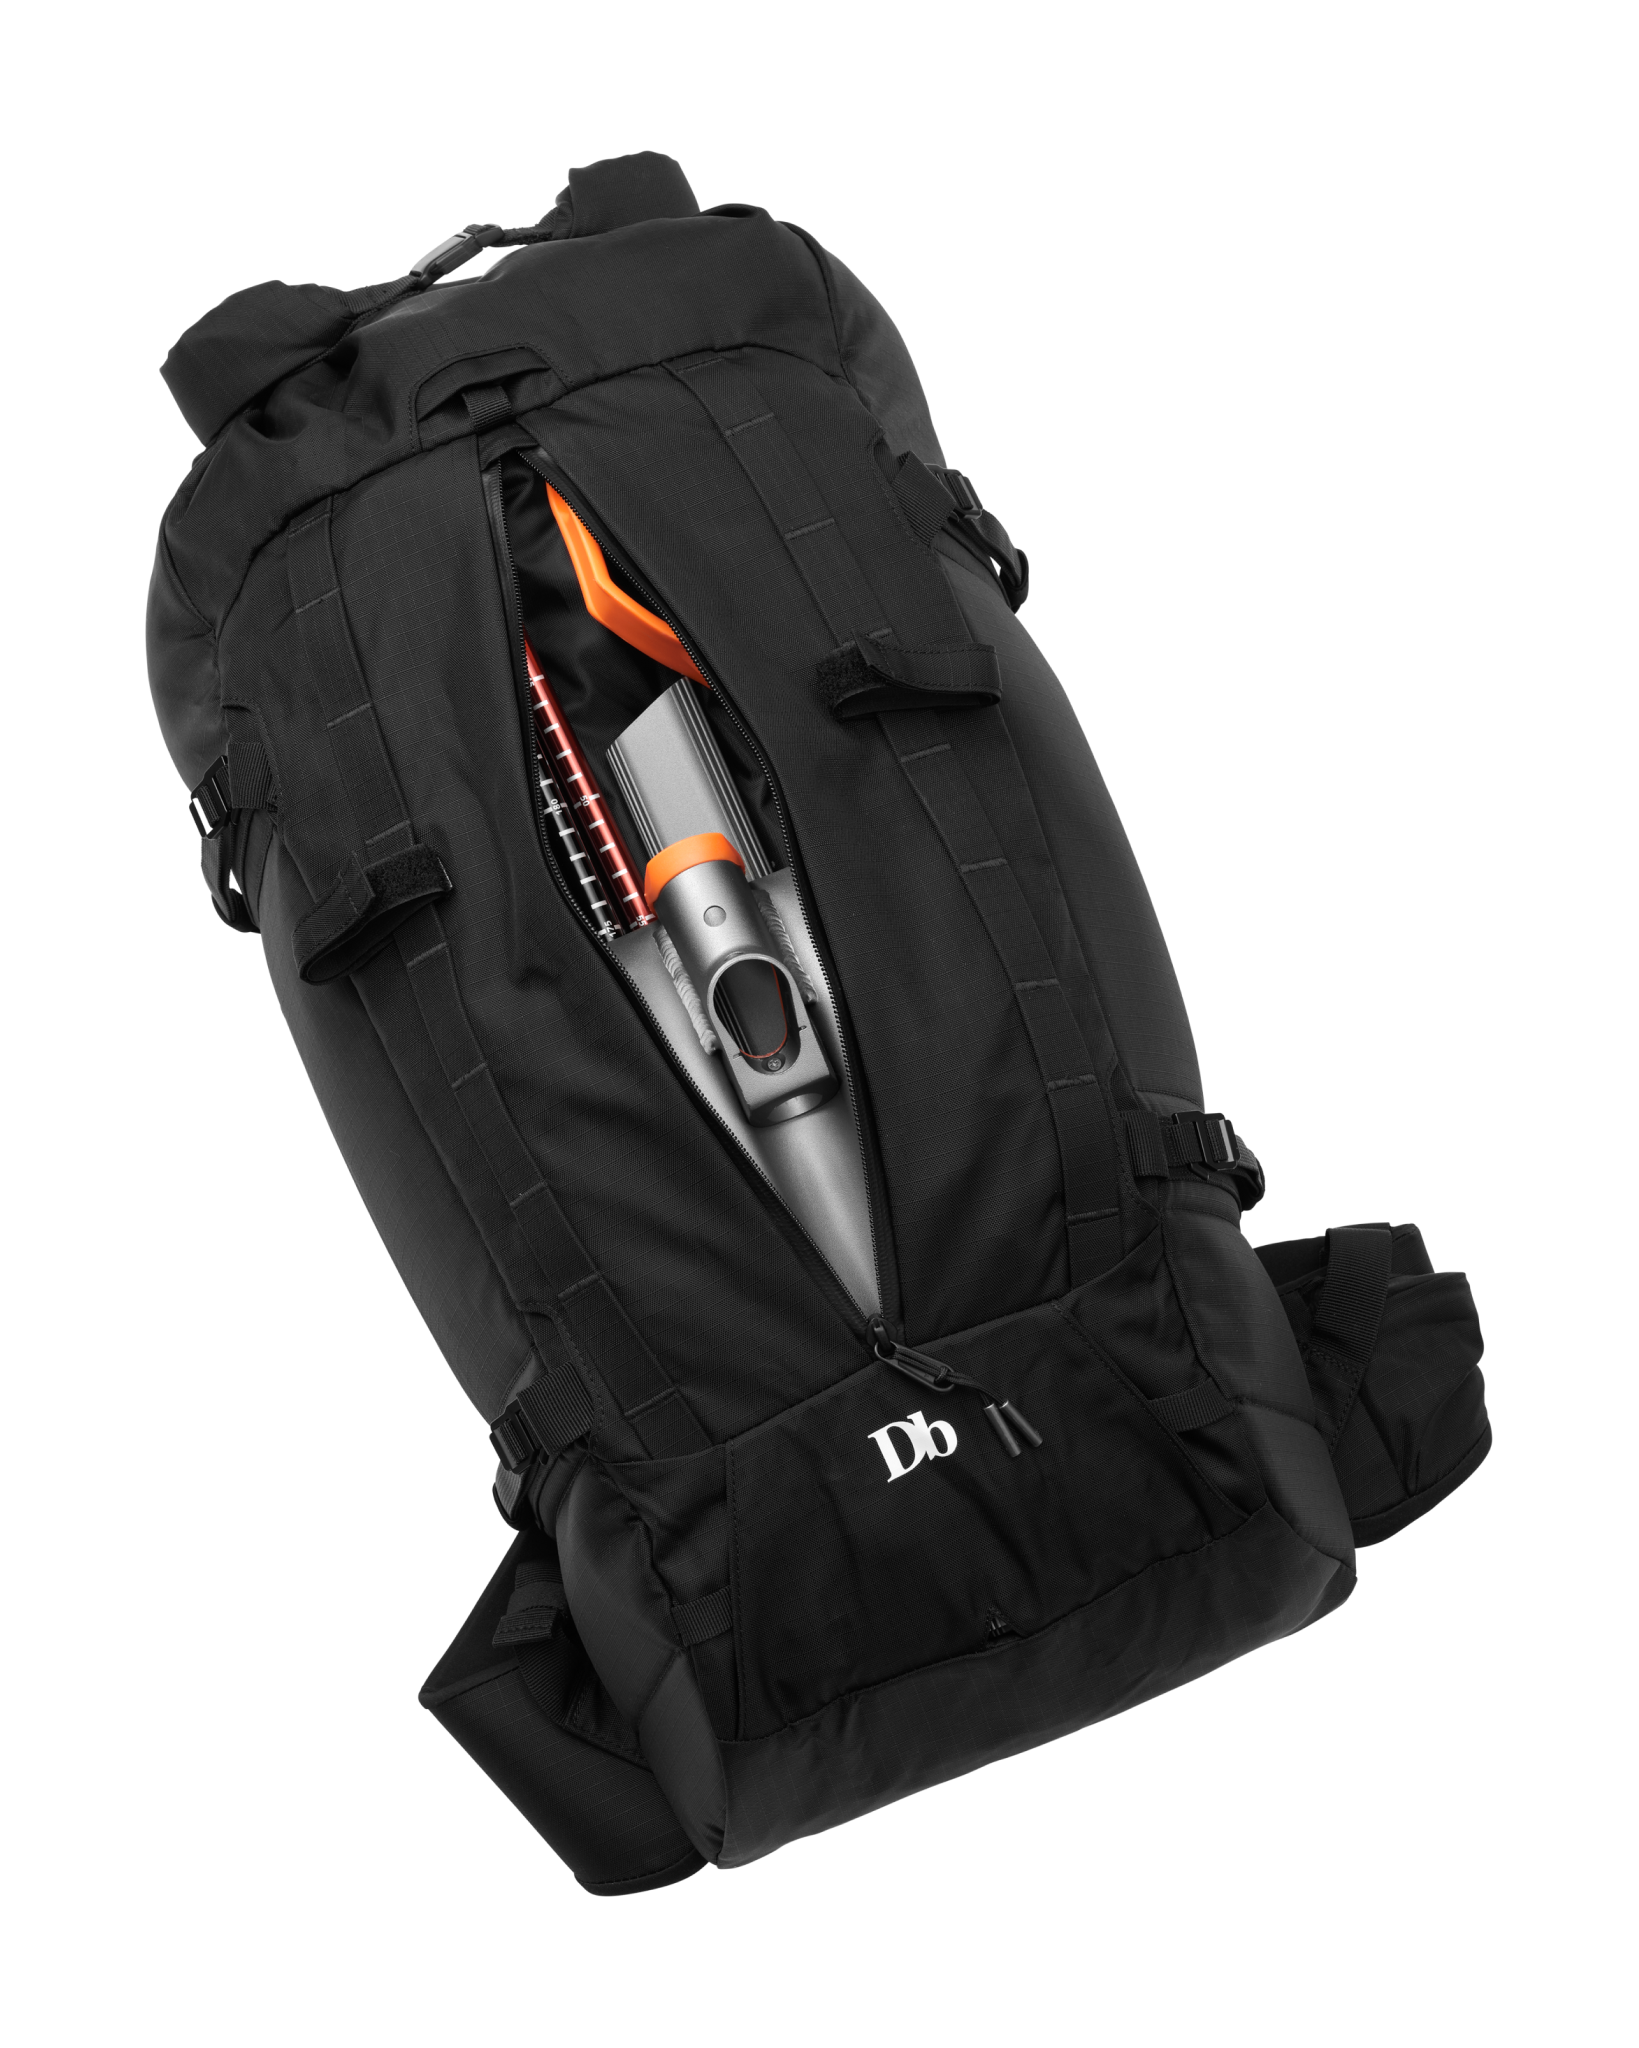 Mosko Moto Backcountry 30L - Miles for Minds